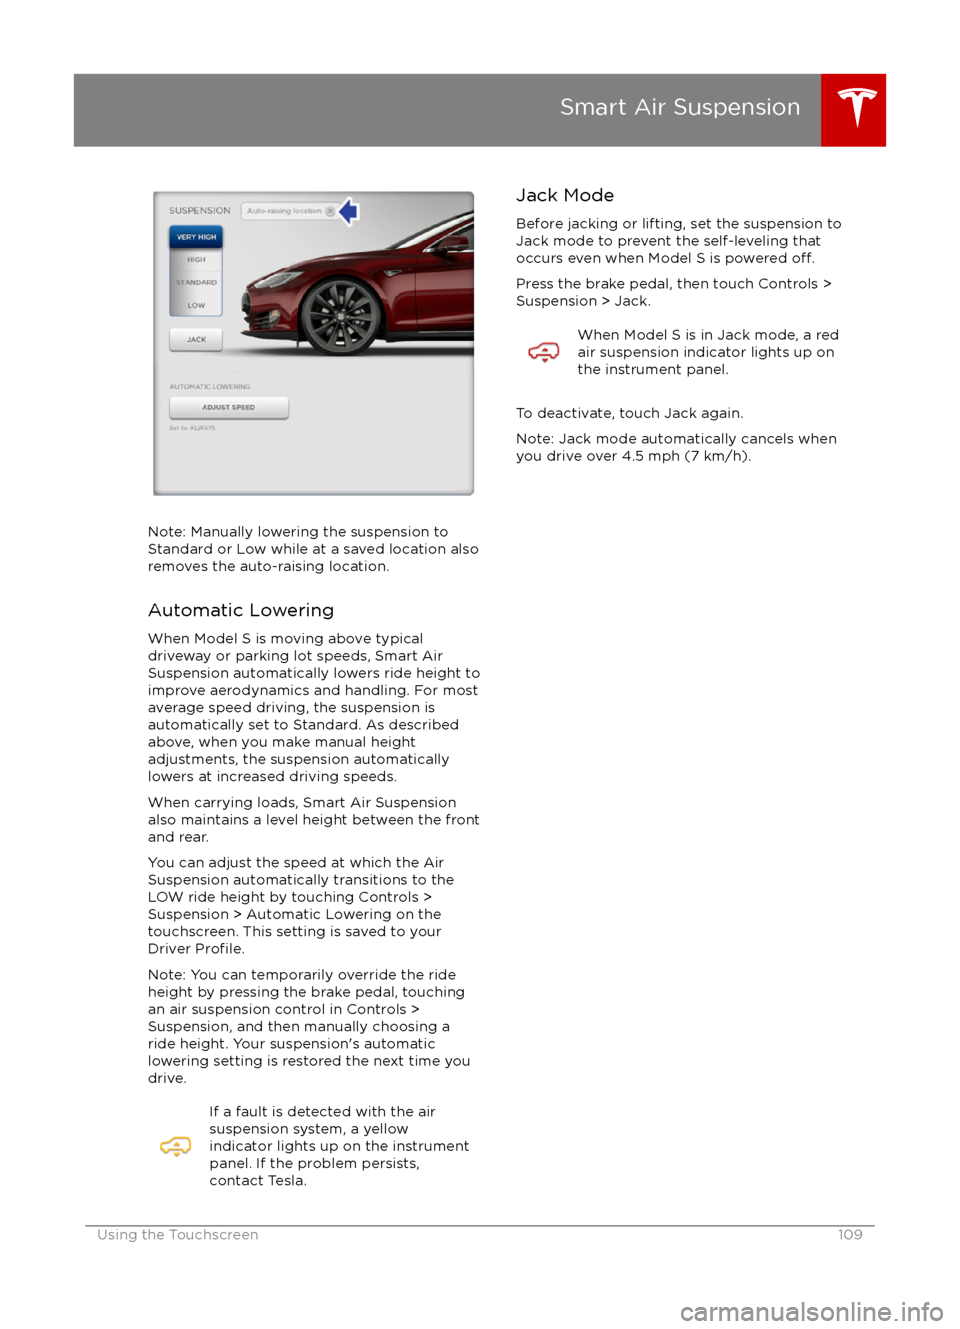 TESLA MODEL S 2016  Owners Manual Note: Manually lowering the suspension toStandard or Low while at a saved location alsoremoves the auto-raising location.
Automatic Lowering
When Model S is moving above typical
driveway or parking lo